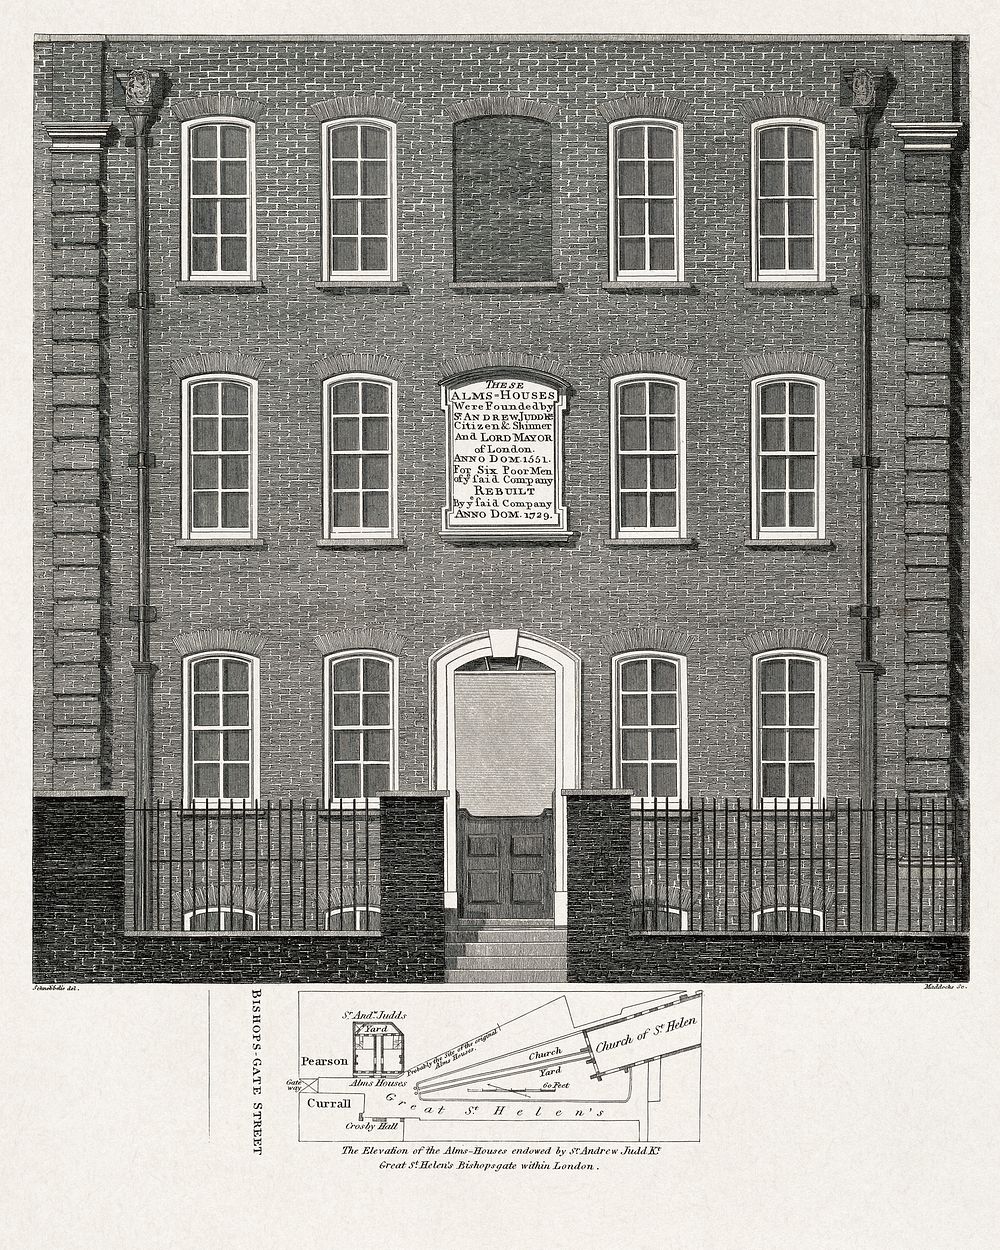 The Alms House in Great St. Helens (1825) engraving art. Original public domain image from Yale Center for British Art.…